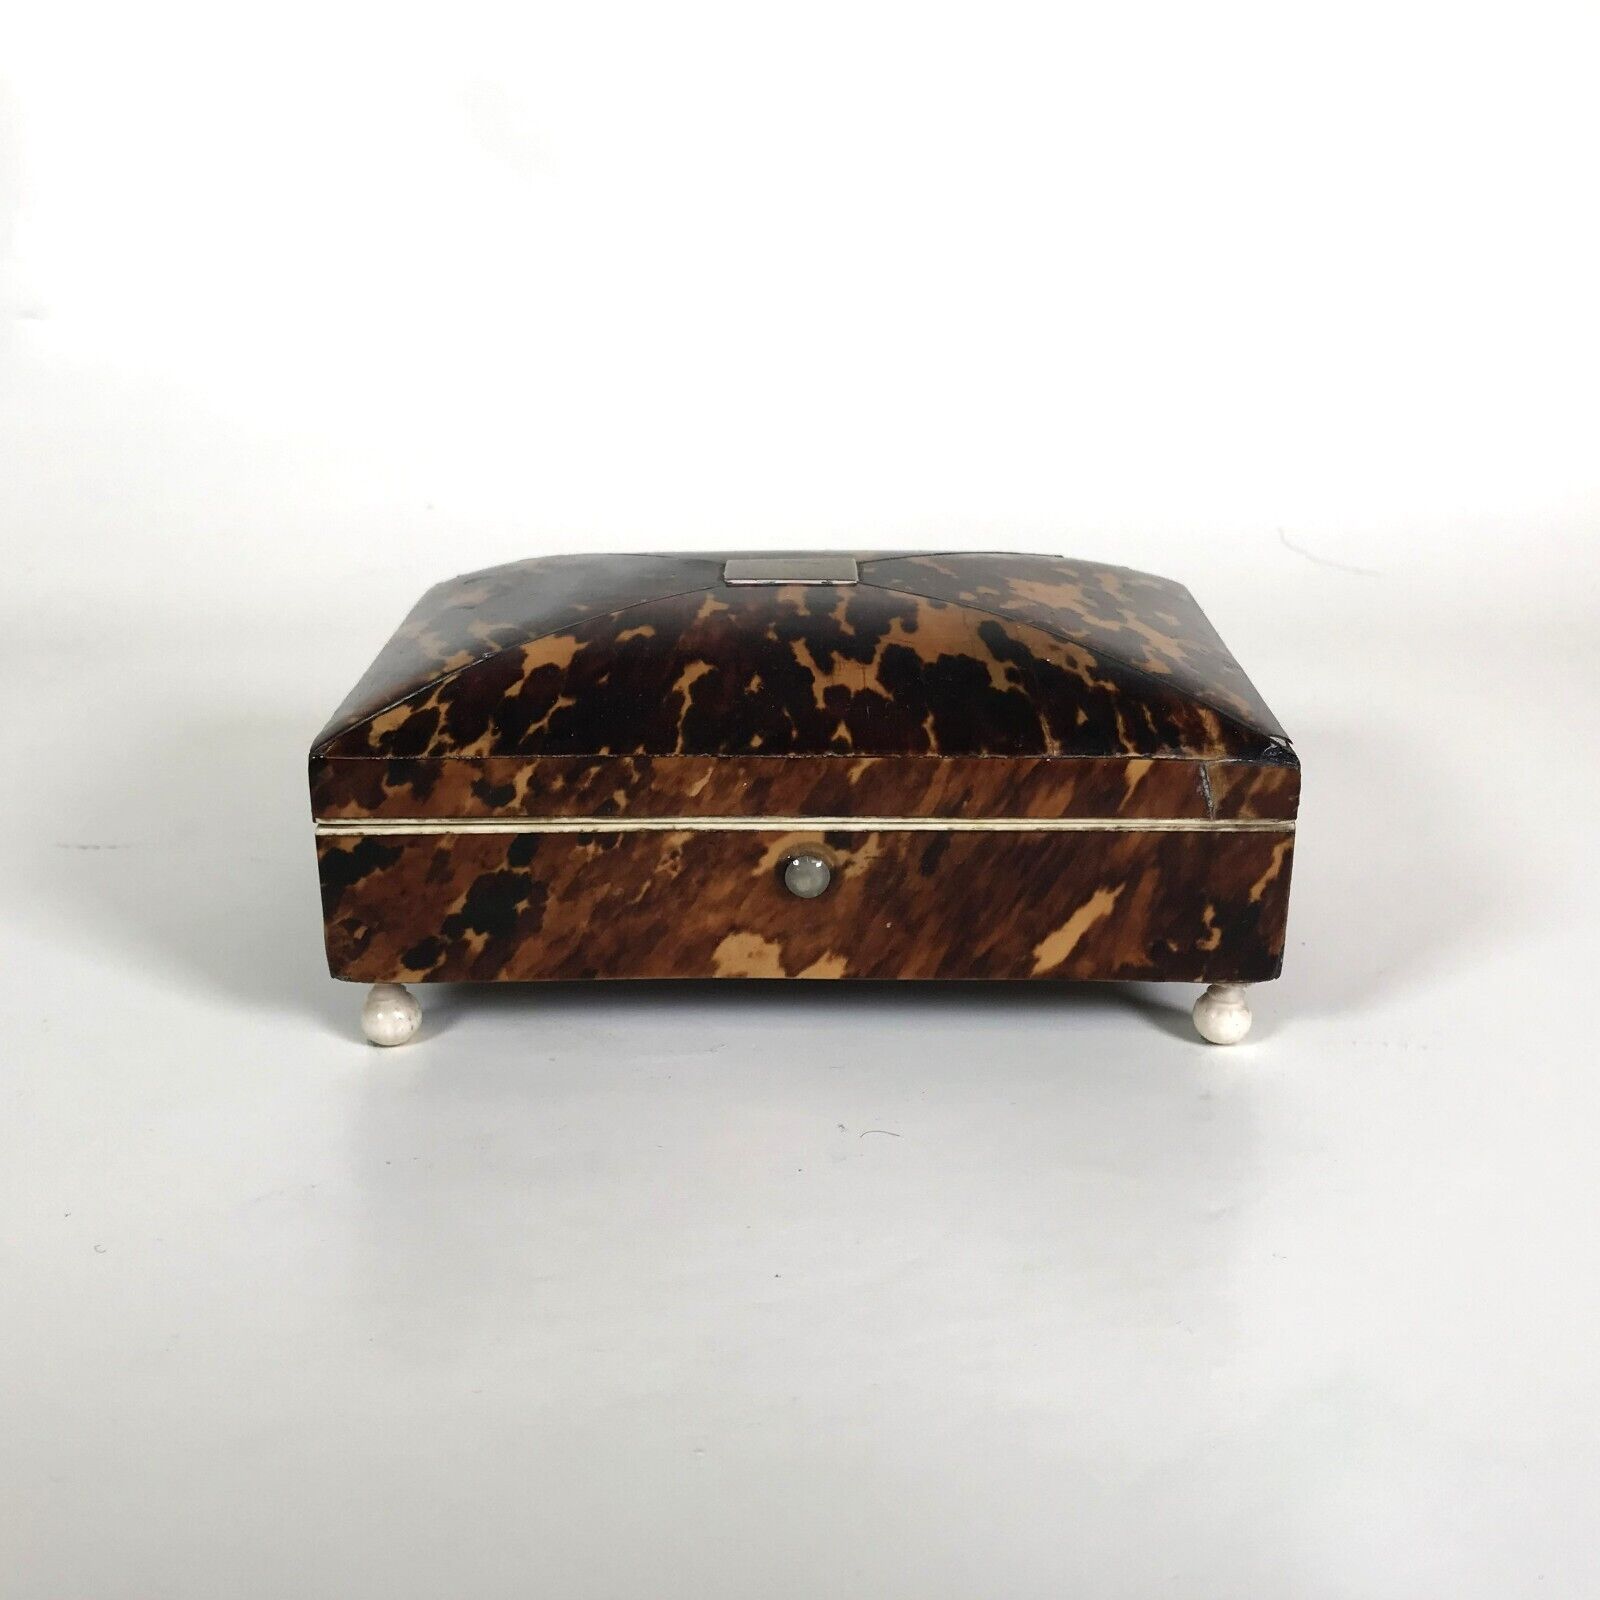 Early 1800s English Faux Tortoise Shell Footed Box